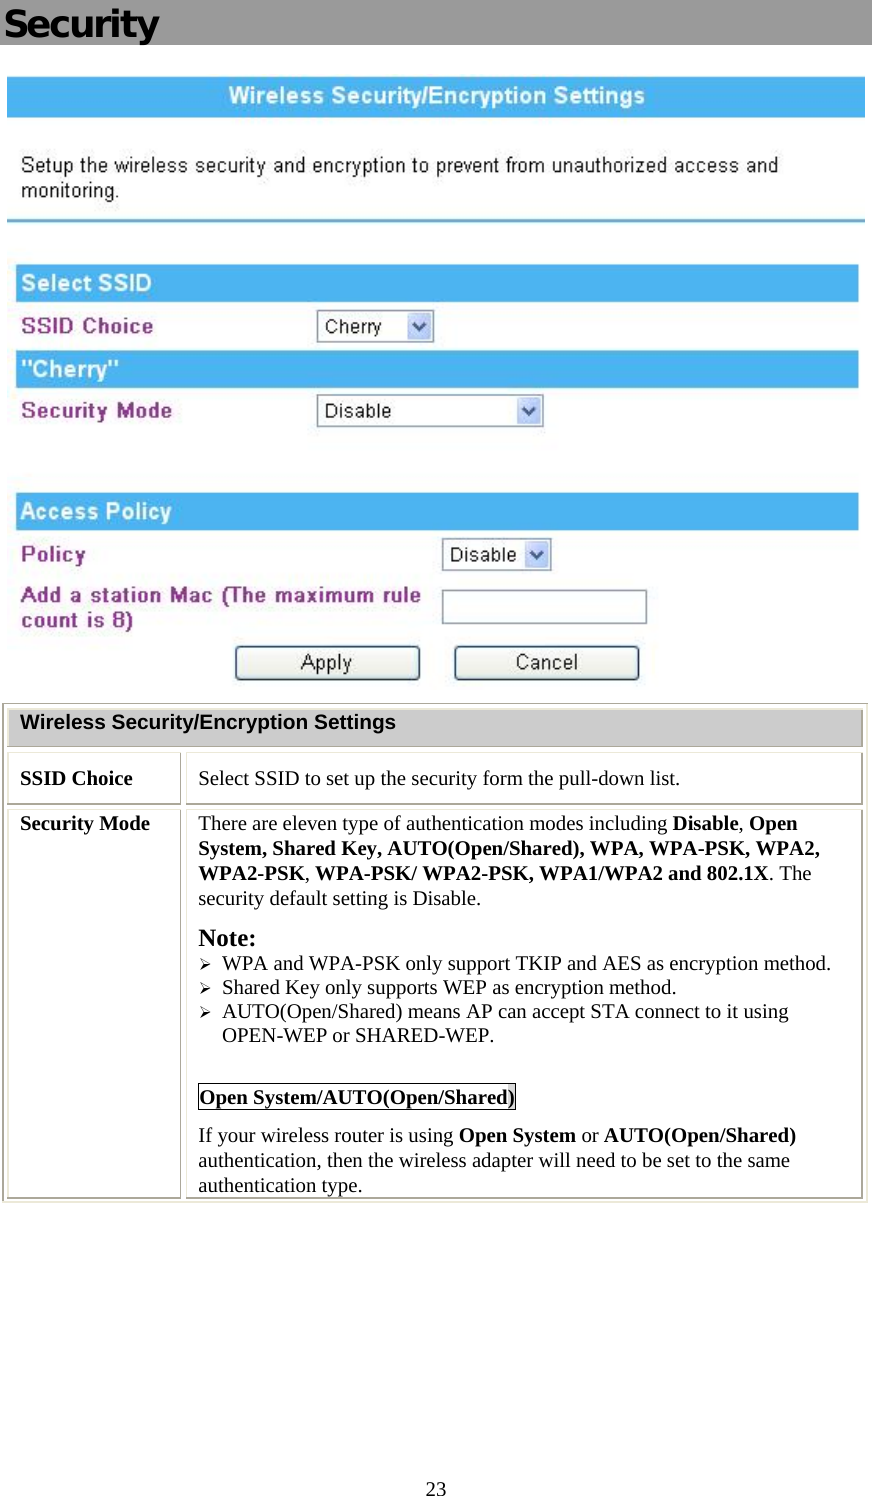   23Security  Wireless Security/Encryption Settings SSID Choice  Select SSID to set up the security form the pull-down list. Security Mode  There are eleven type of authentication modes including Disable, Open System, Shared Key, AUTO(Open/Shared), WPA, WPA-PSK, WPA2, WPA2-PSK, WPA-PSK/ WPA2-PSK, WPA1/WPA2 and 802.1X. The security default setting is Disable. Note:  ¾ WPA and WPA-PSK only support TKIP and AES as encryption method. ¾ Shared Key only supports WEP as encryption method. ¾ AUTO(Open/Shared) means AP can accept STA connect to it using OPEN-WEP or SHARED-WEP.  Open System/AUTO(Open/Shared) If your wireless router is using Open System or AUTO(Open/Shared) authentication, then the wireless adapter will need to be set to the same authentication type.  